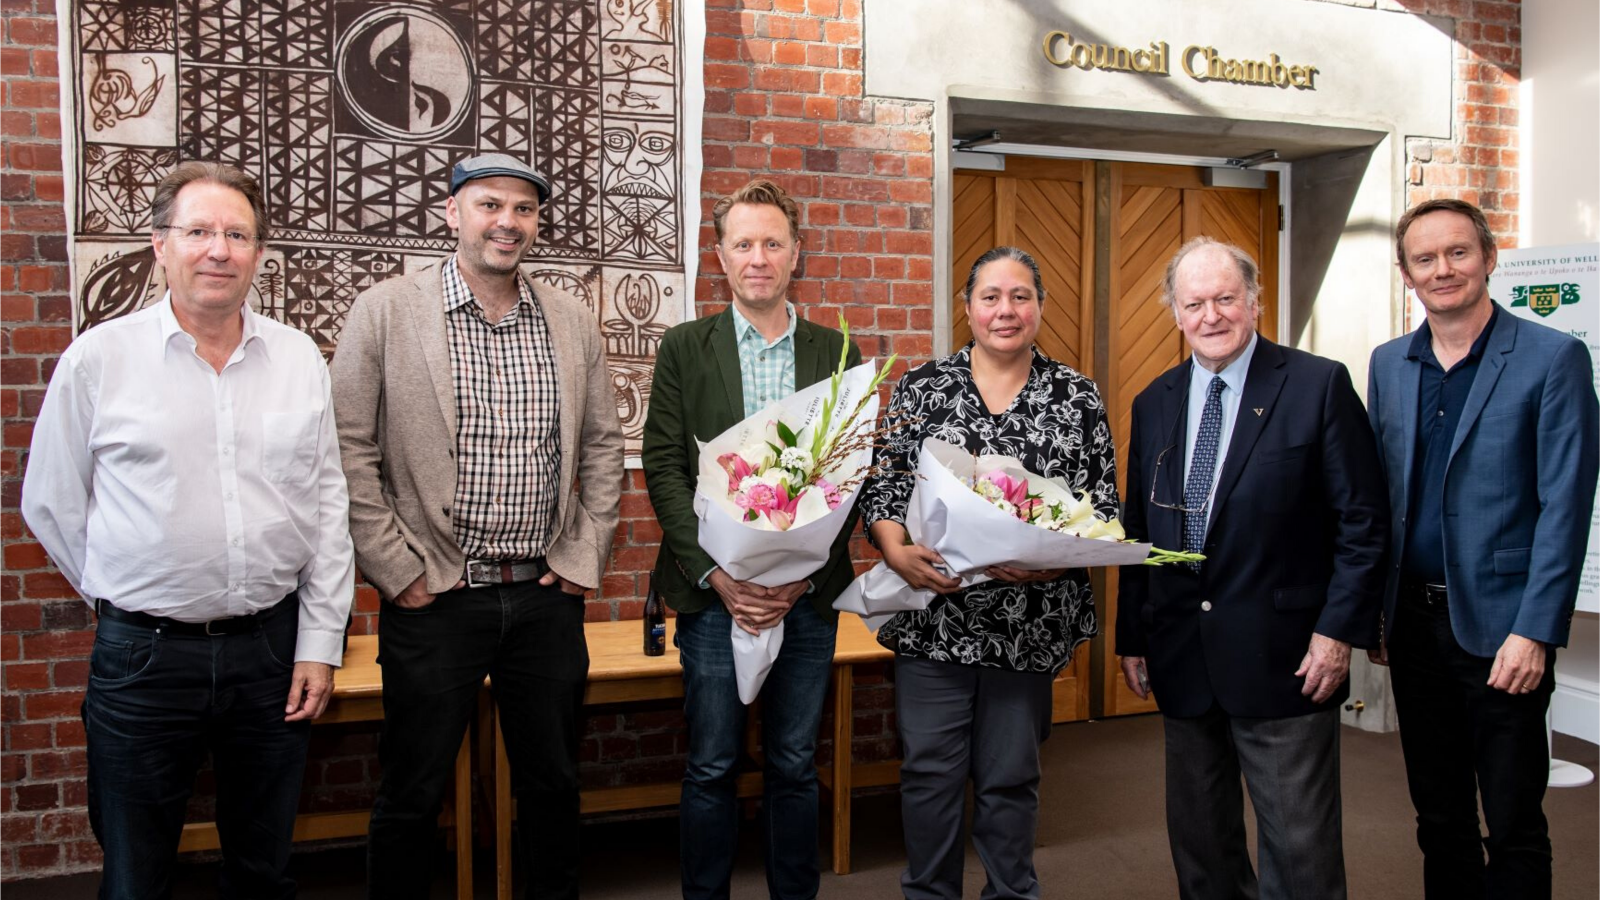 six people in front of the council chamber celebrating prizes, two with flower bouquets